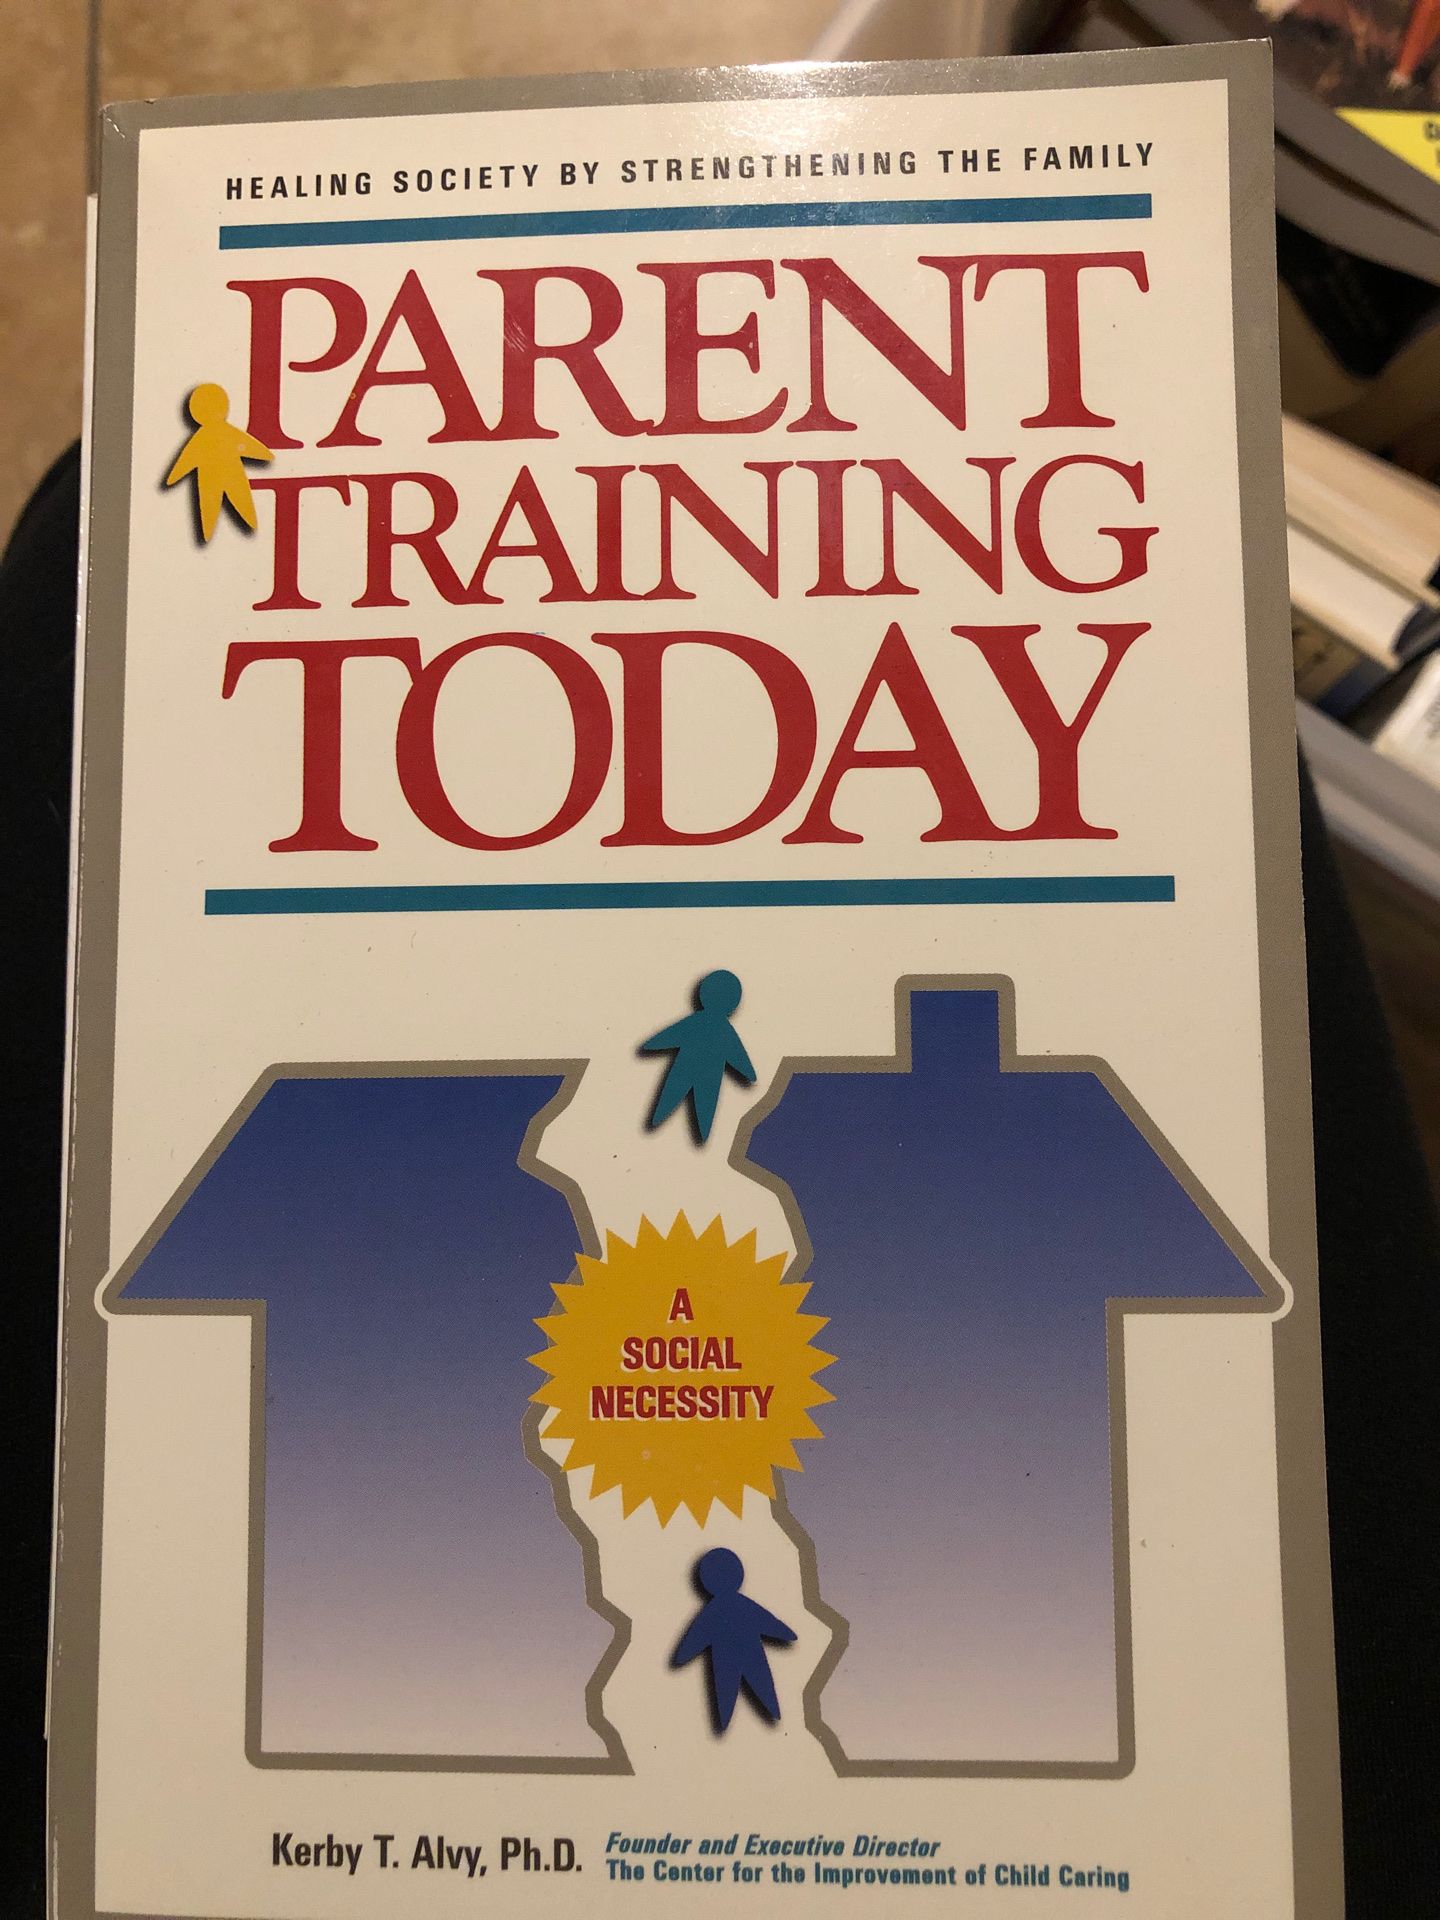 Parenting training today